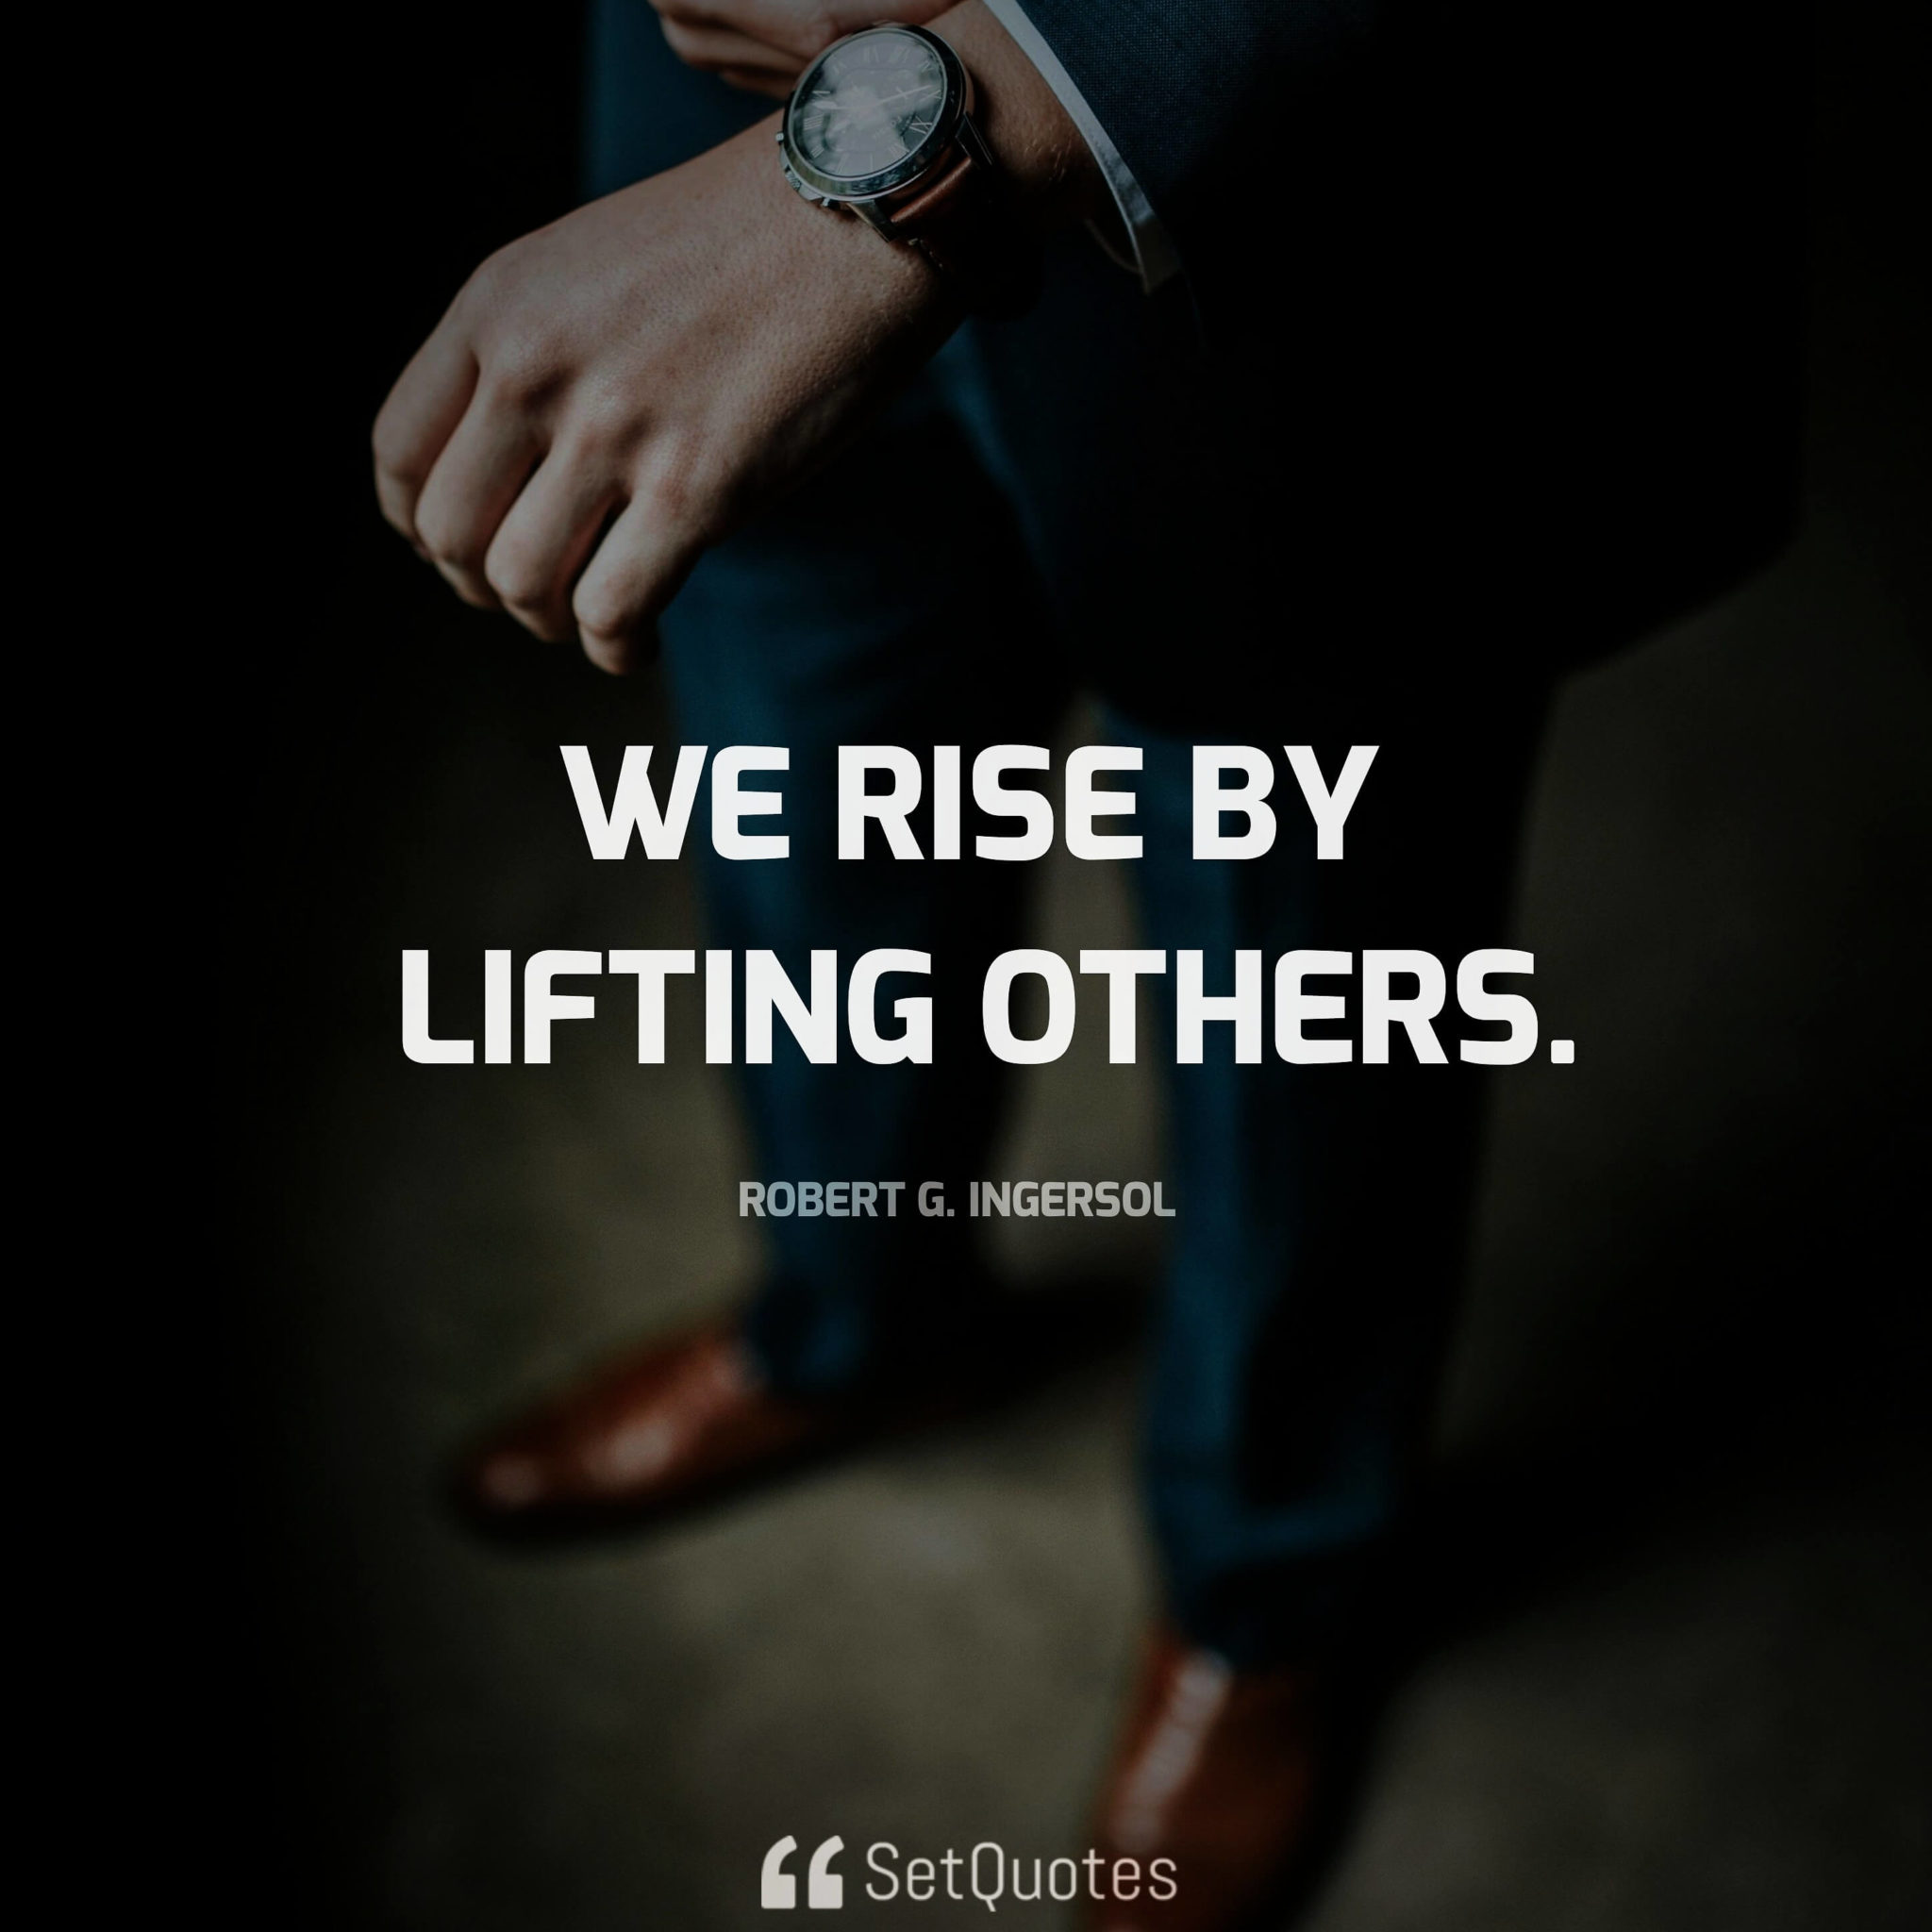 We rise by lifting others. - Robert G. Ingersoll